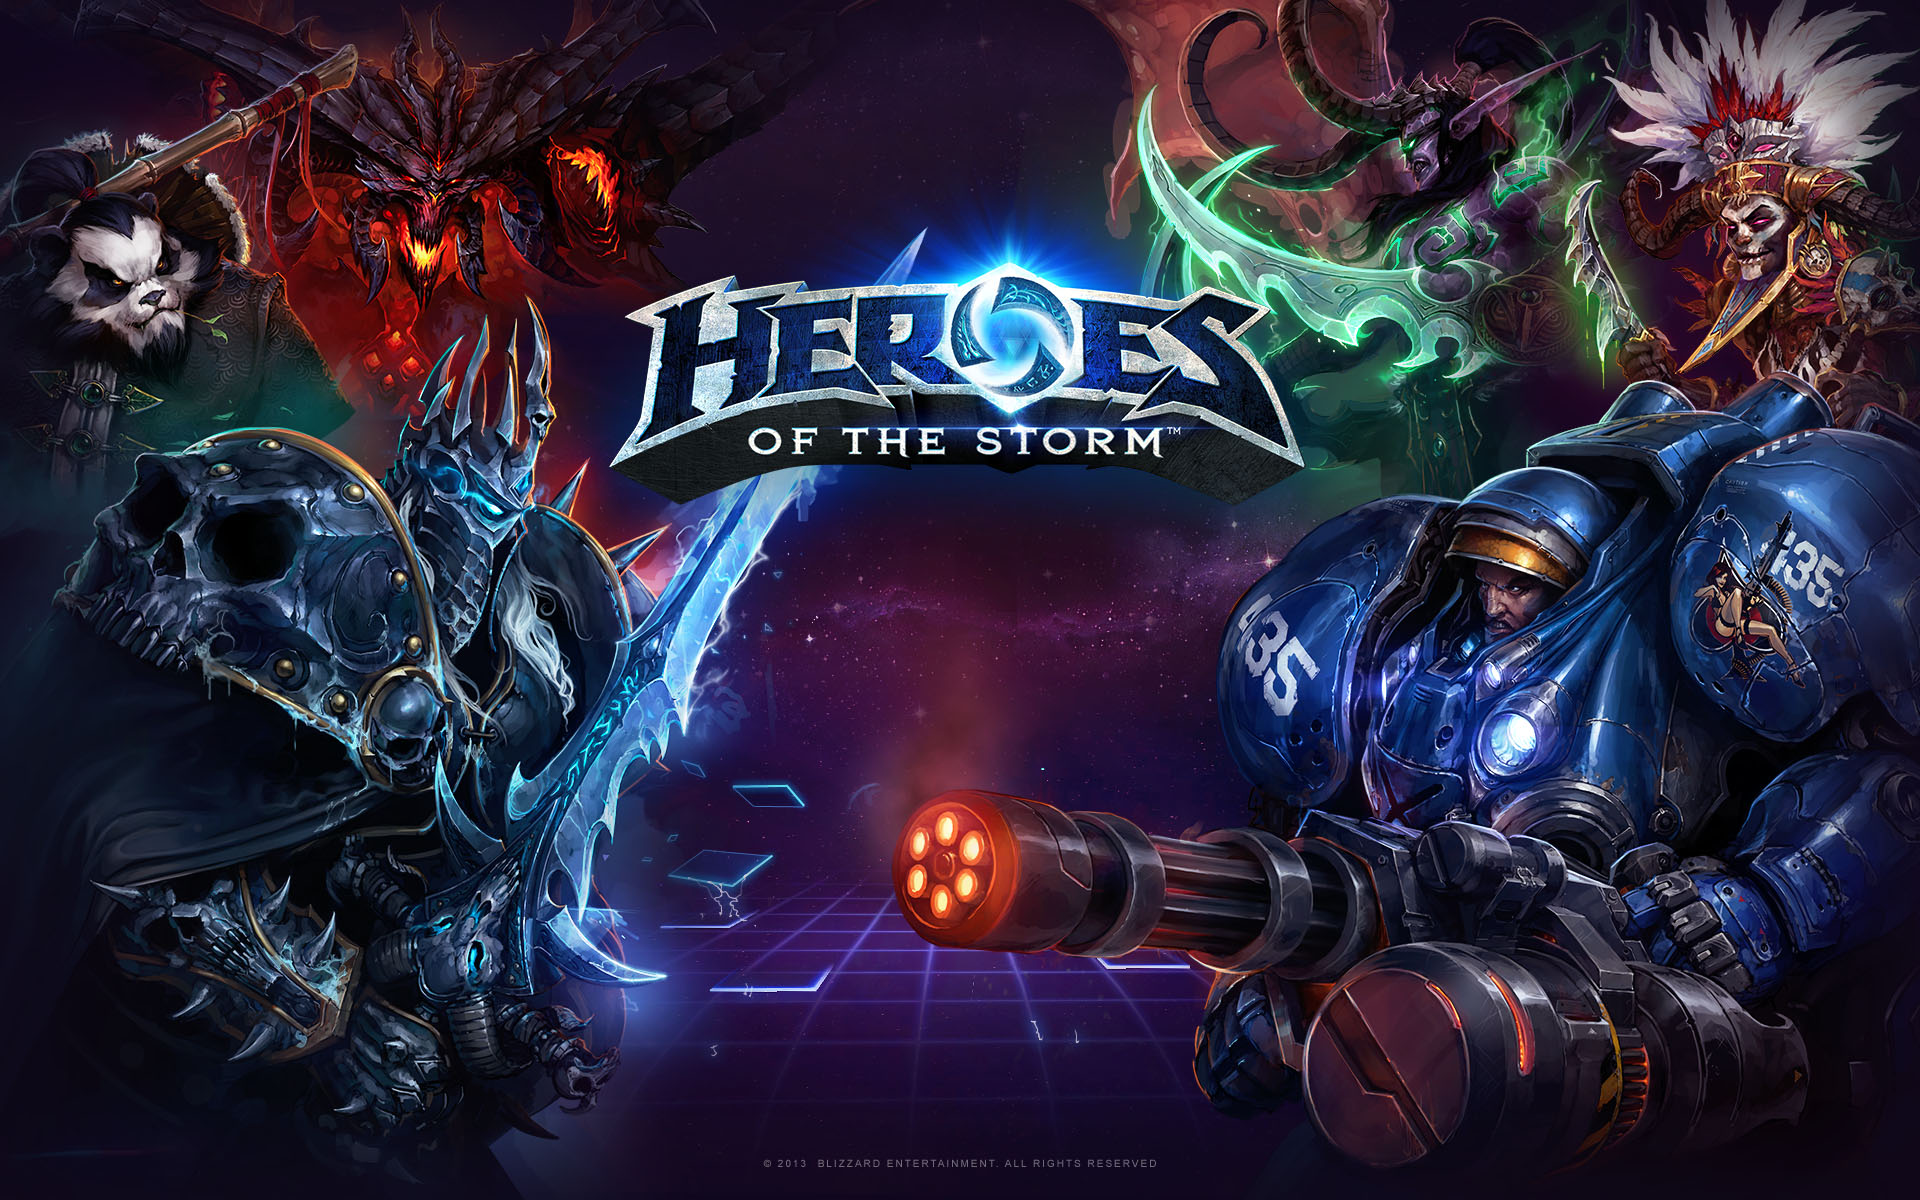 Heroes Of The Storm Backgrounds, Compatible - PC, Mobile, Gadgets| 1920x1200 px